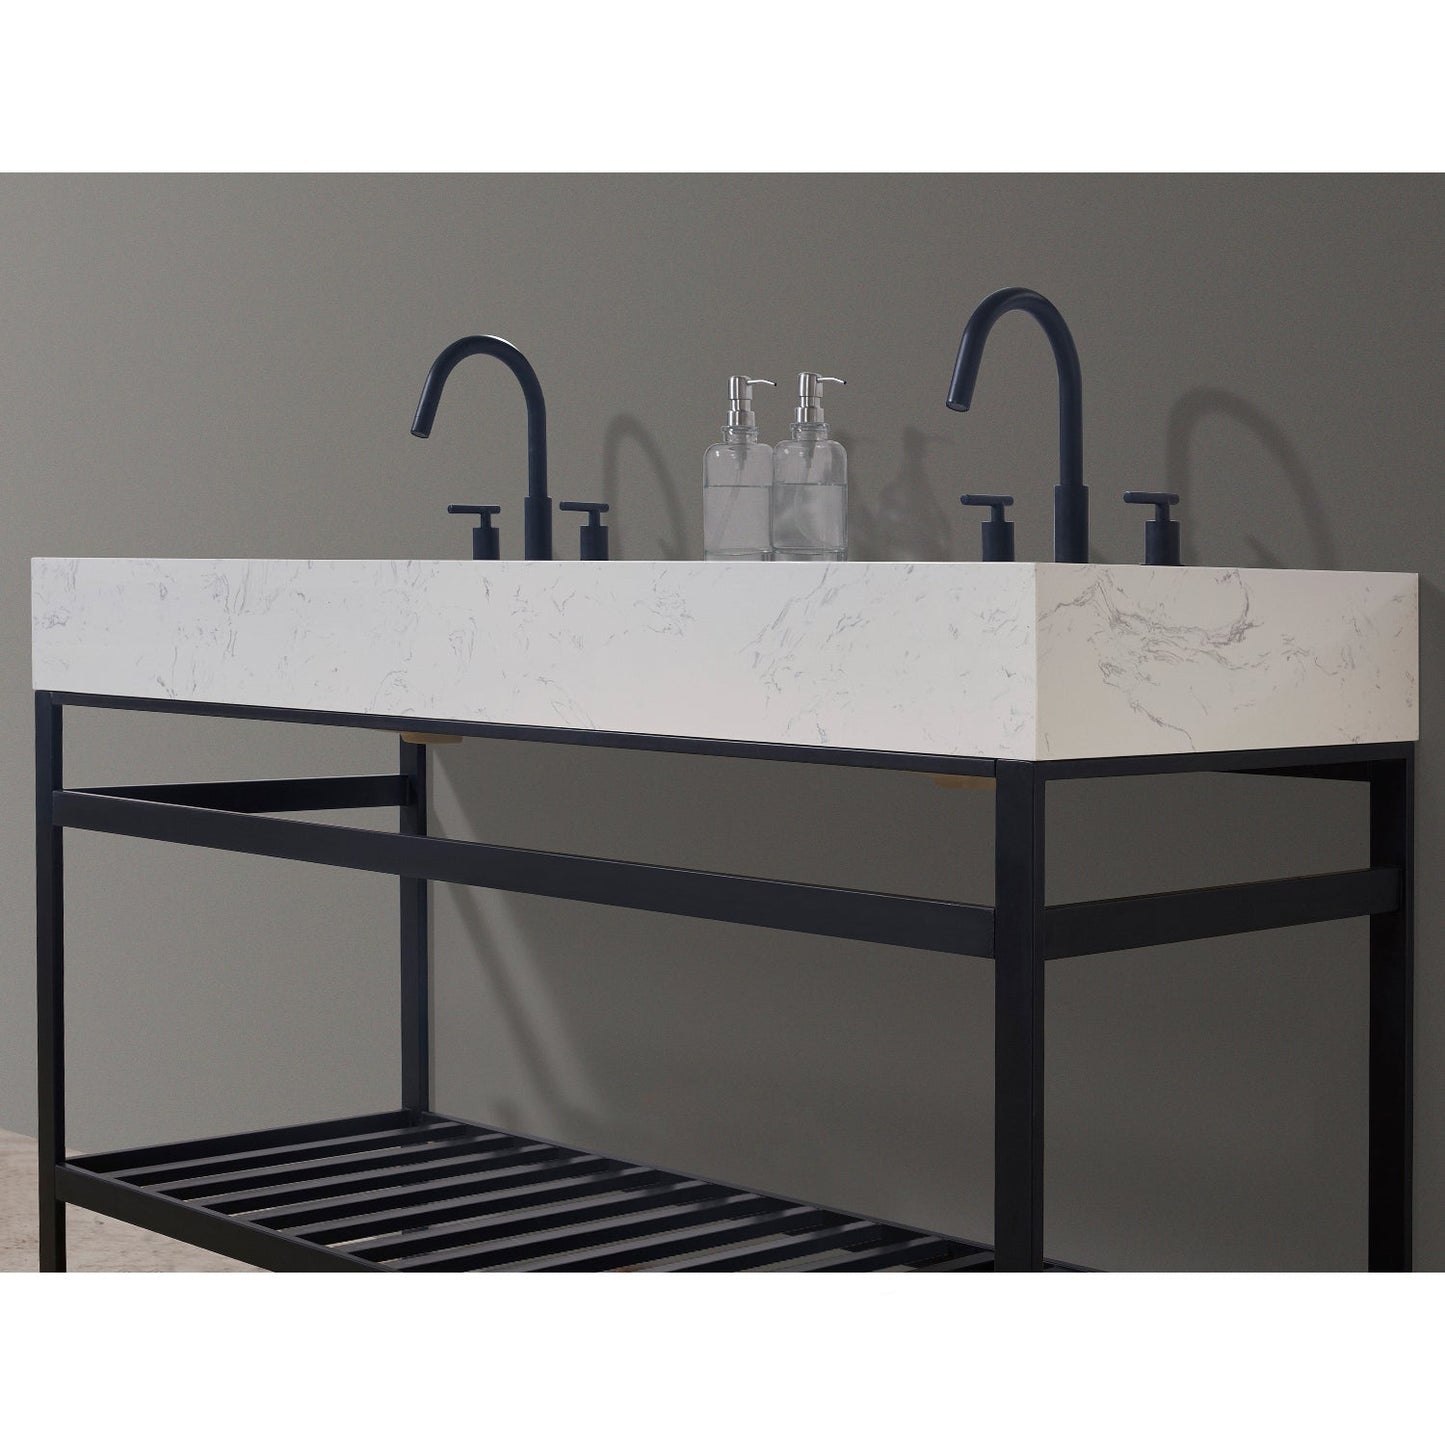 Merano 60" Double Stainless Steel Vanity Console in Matt Black with Aosta White Stone Countertop without Mirror